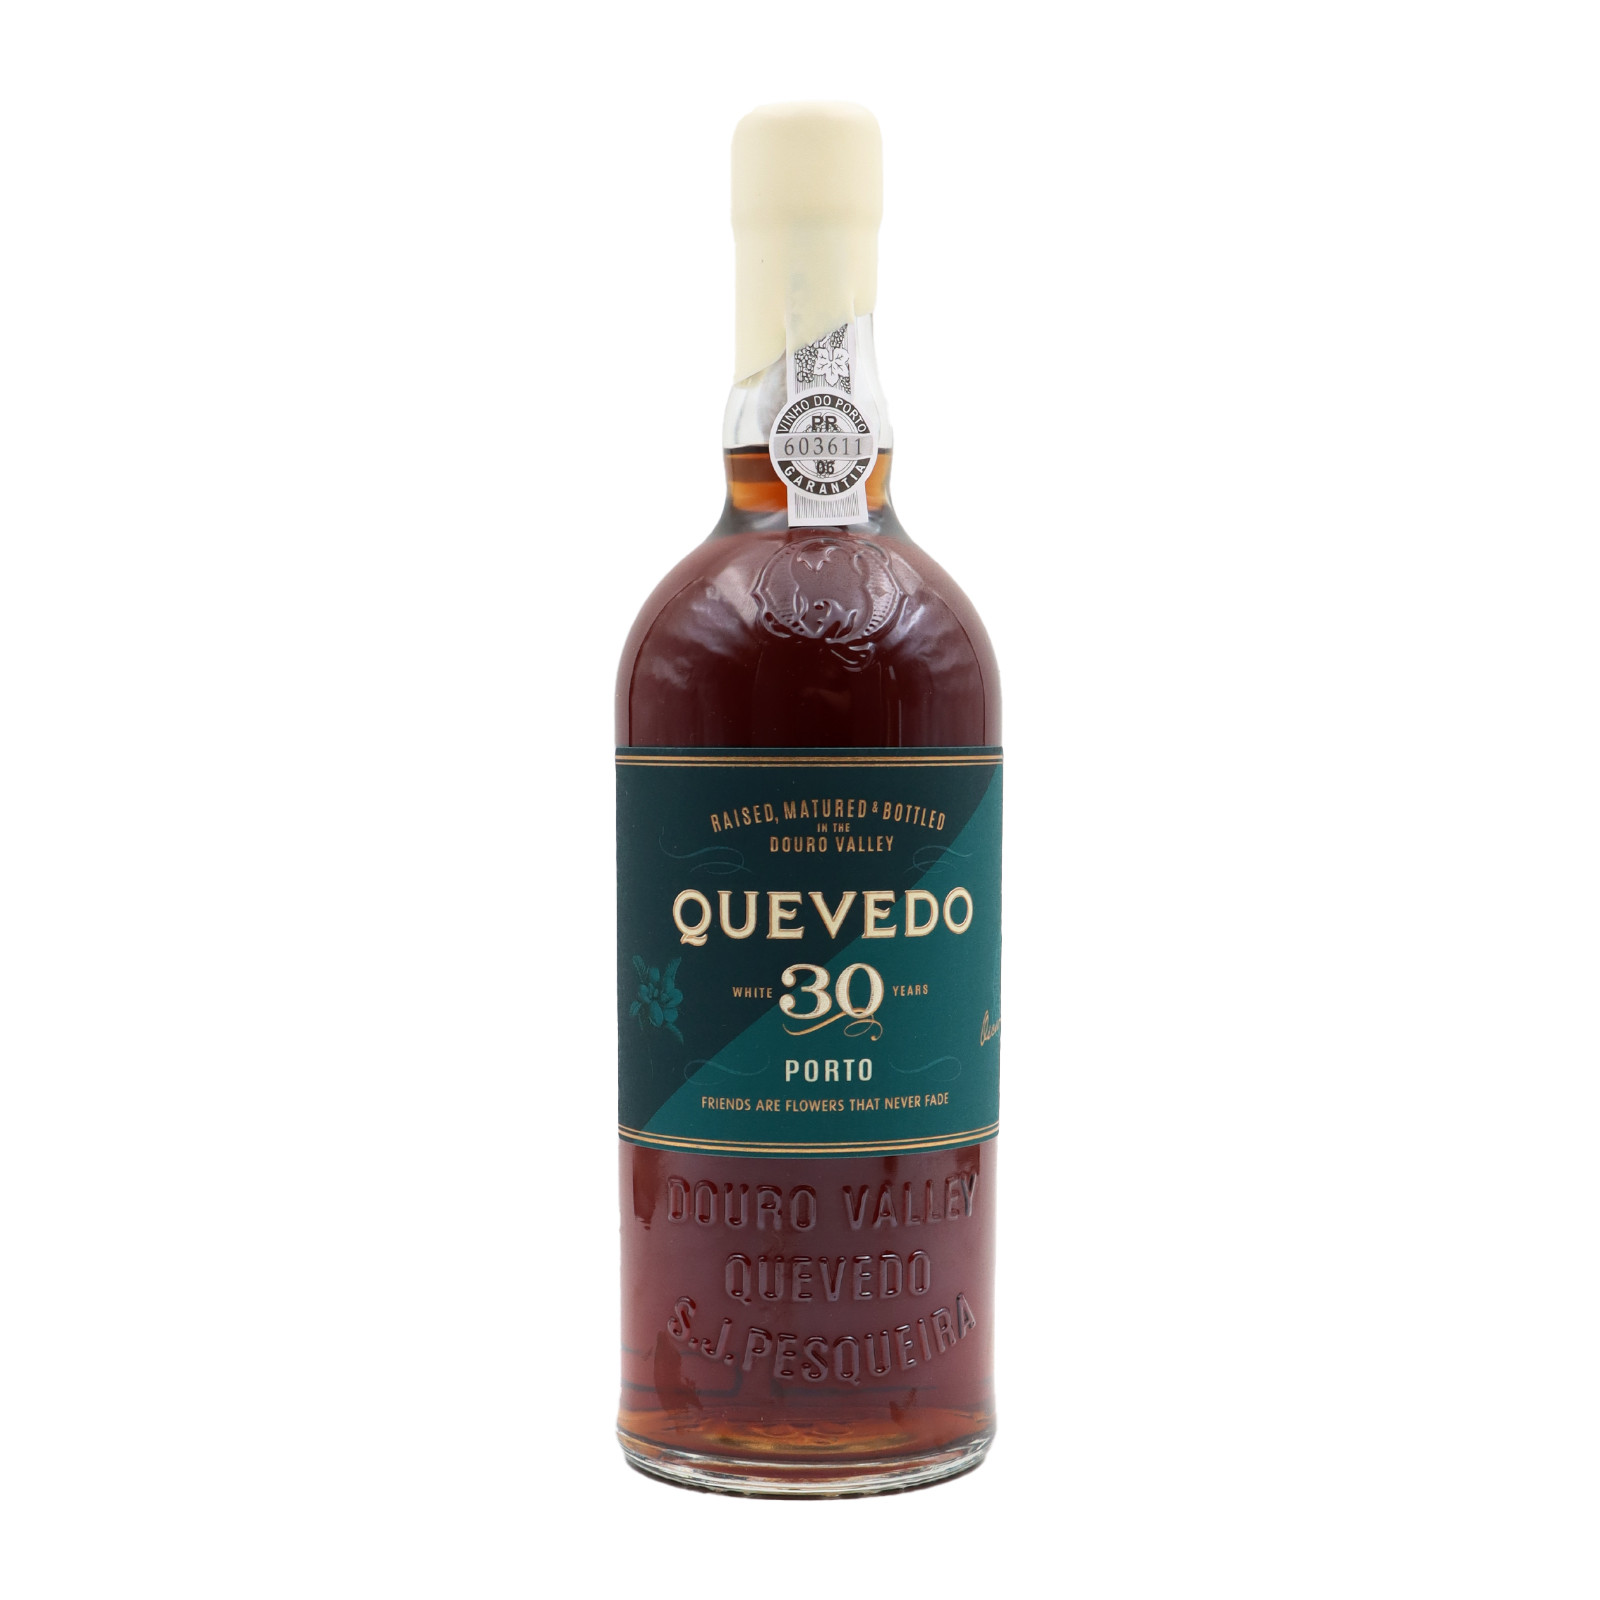 Quevedo 30 years old White Port